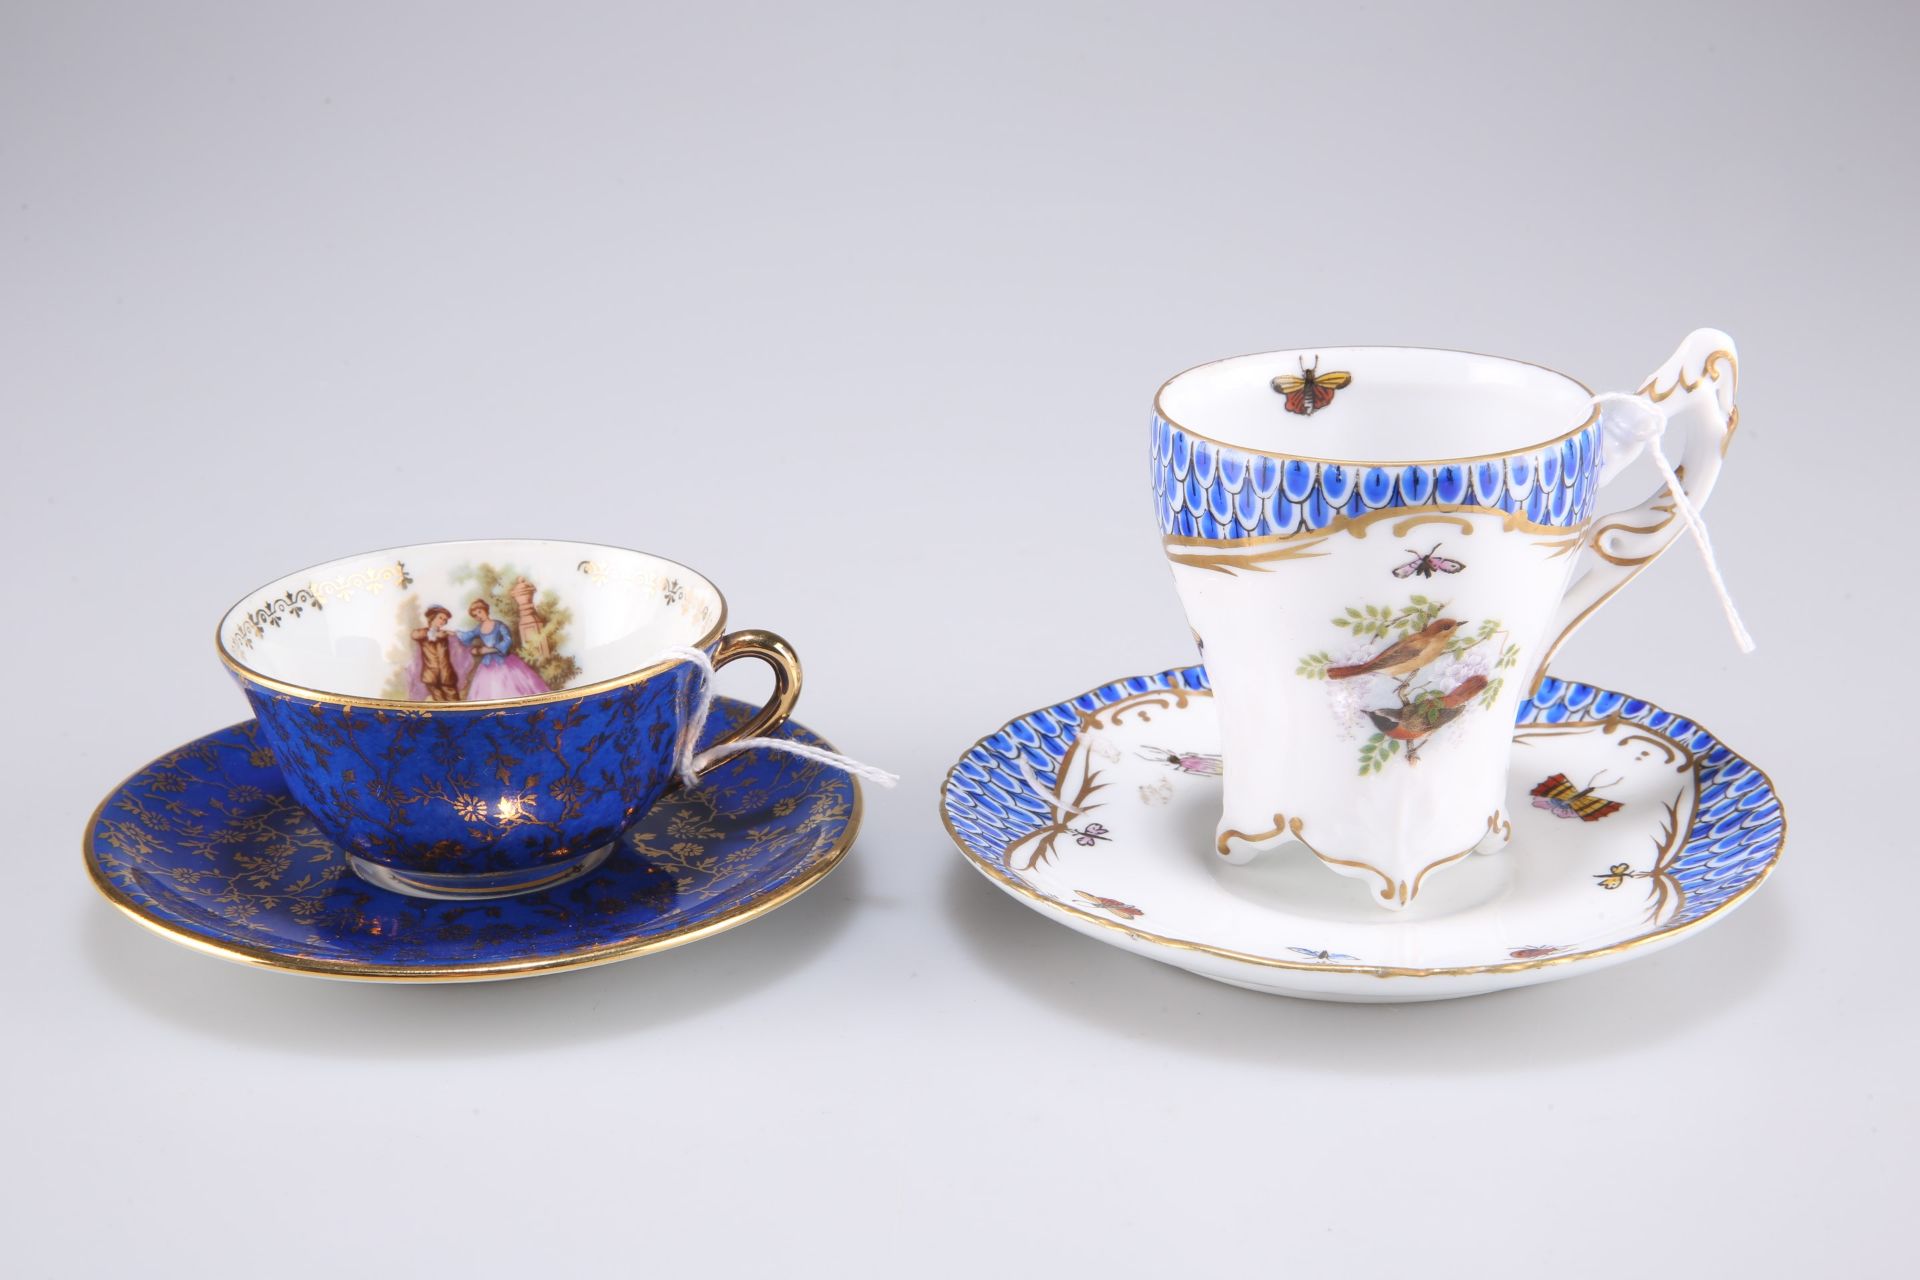 A Continental style cup and saucer decorated with butterflies and birds together with a Limoges